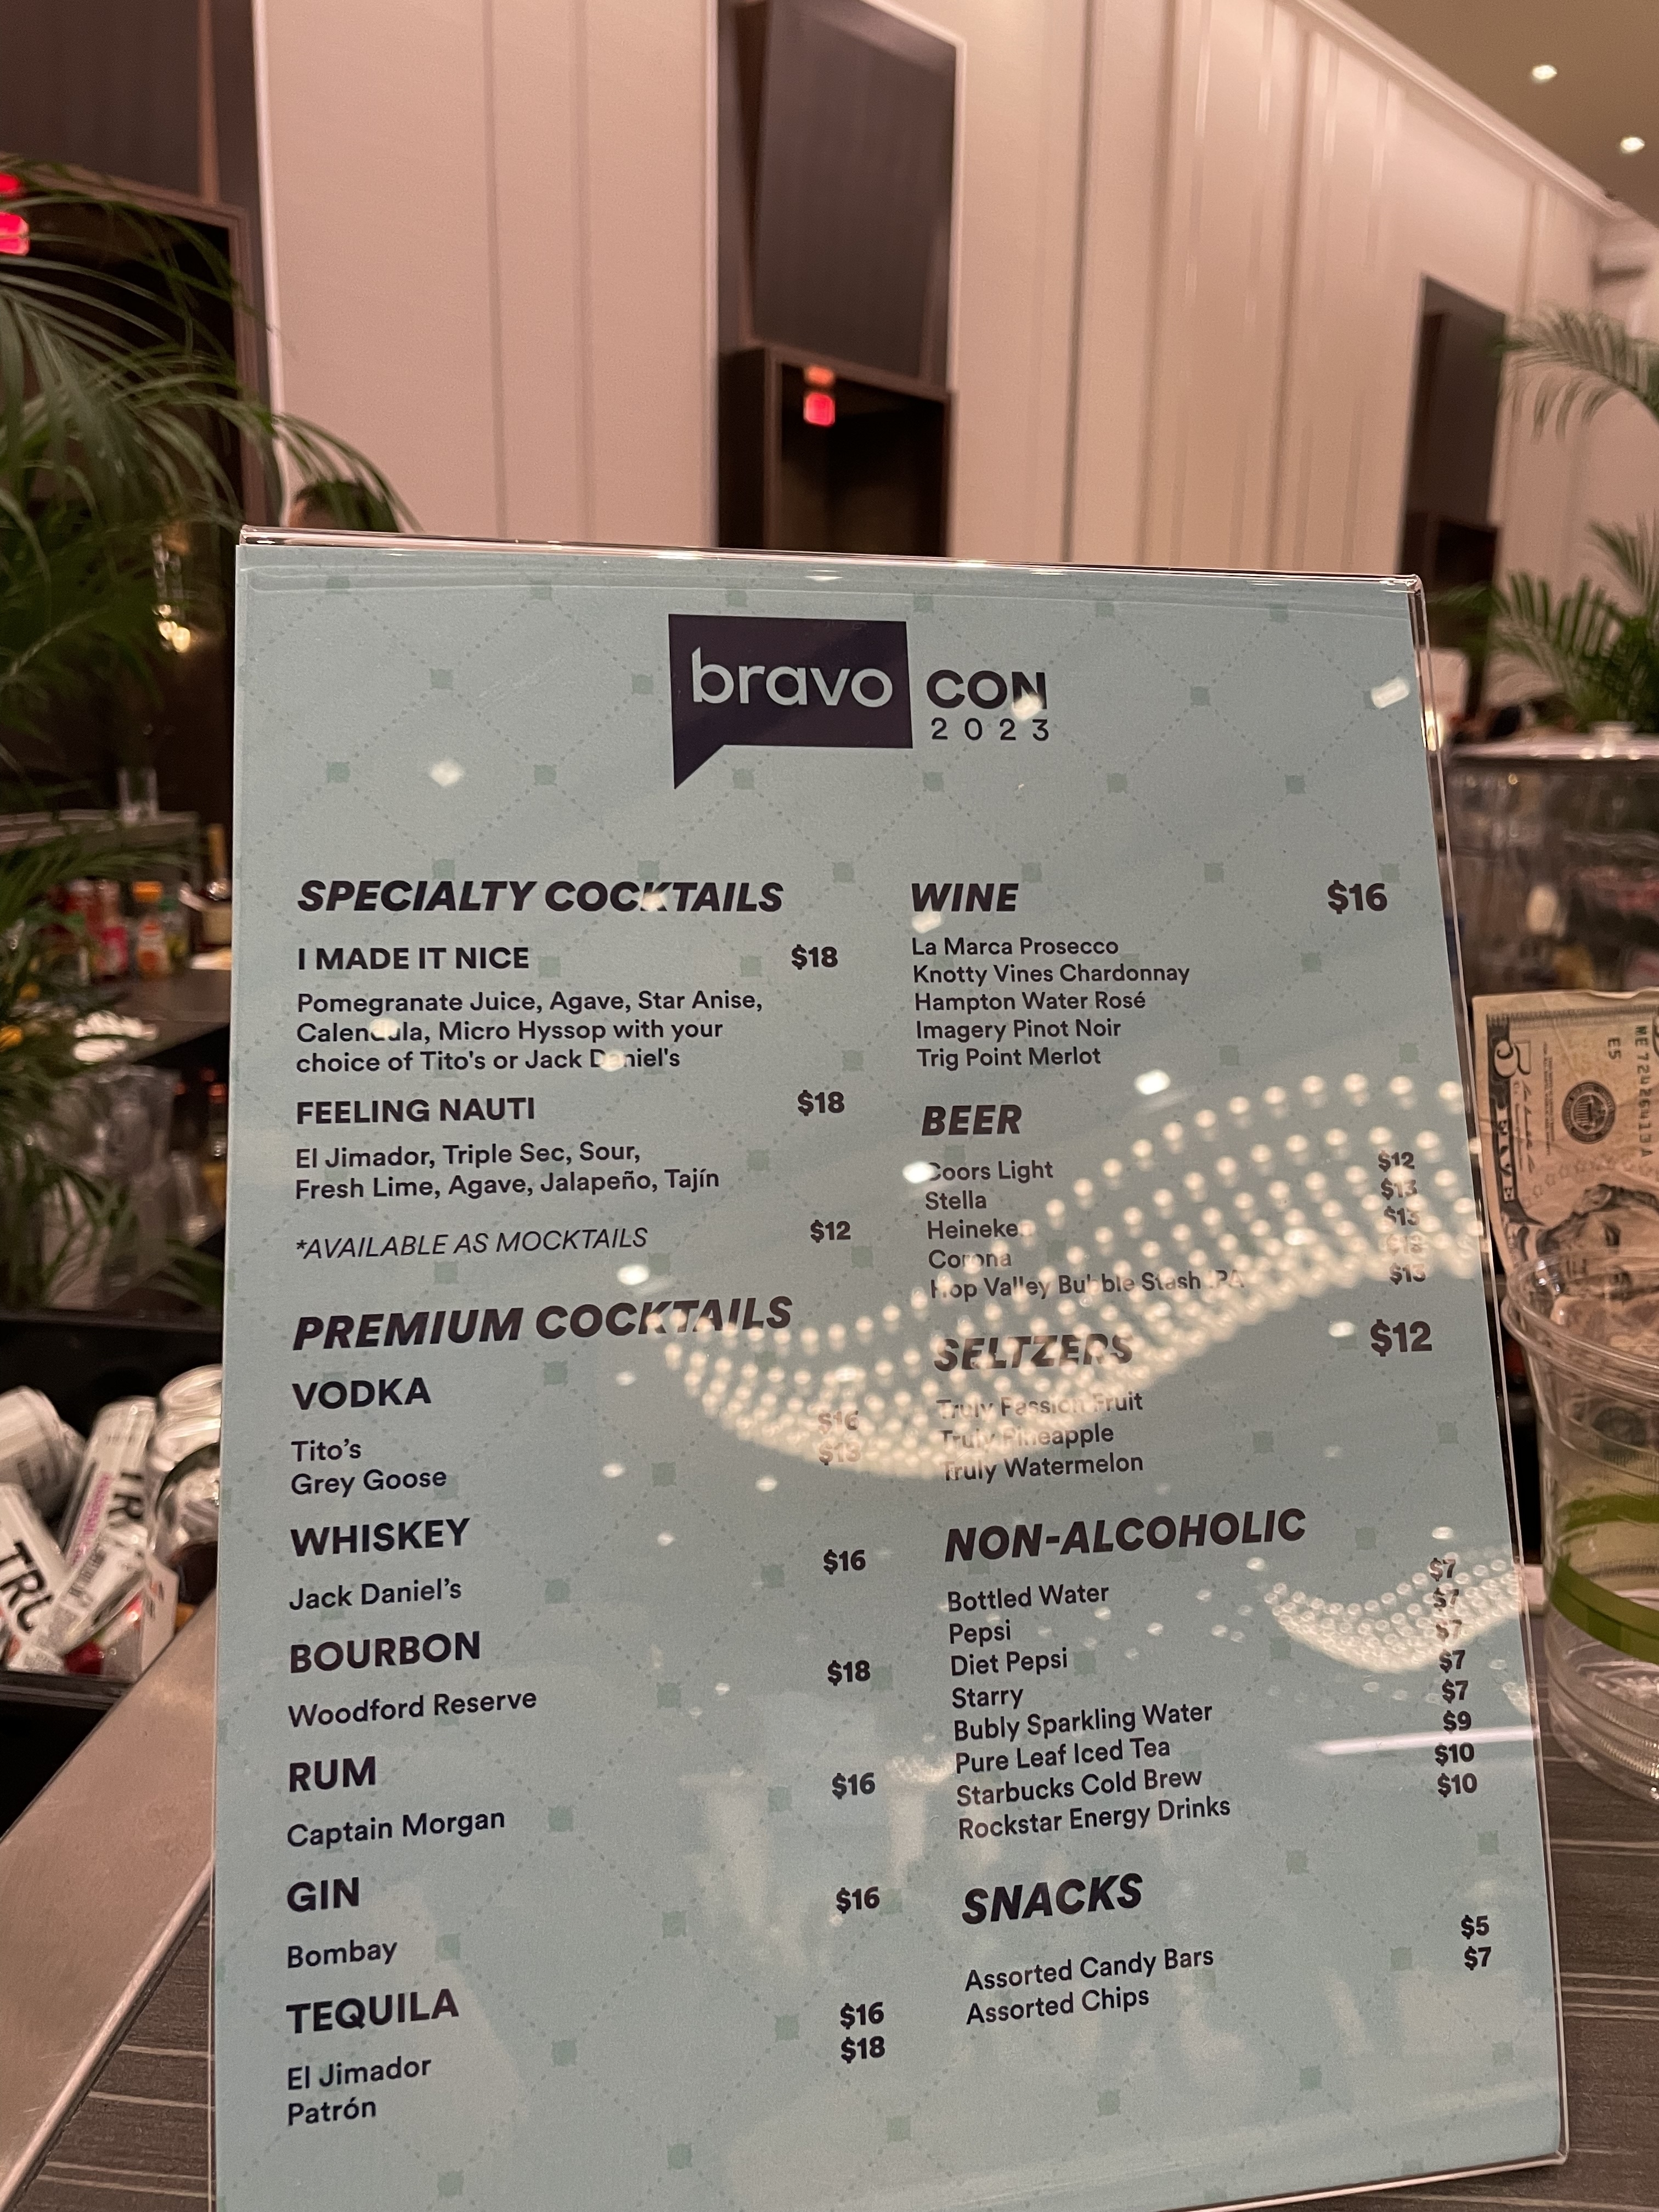 A shot of the alcohol drink menu